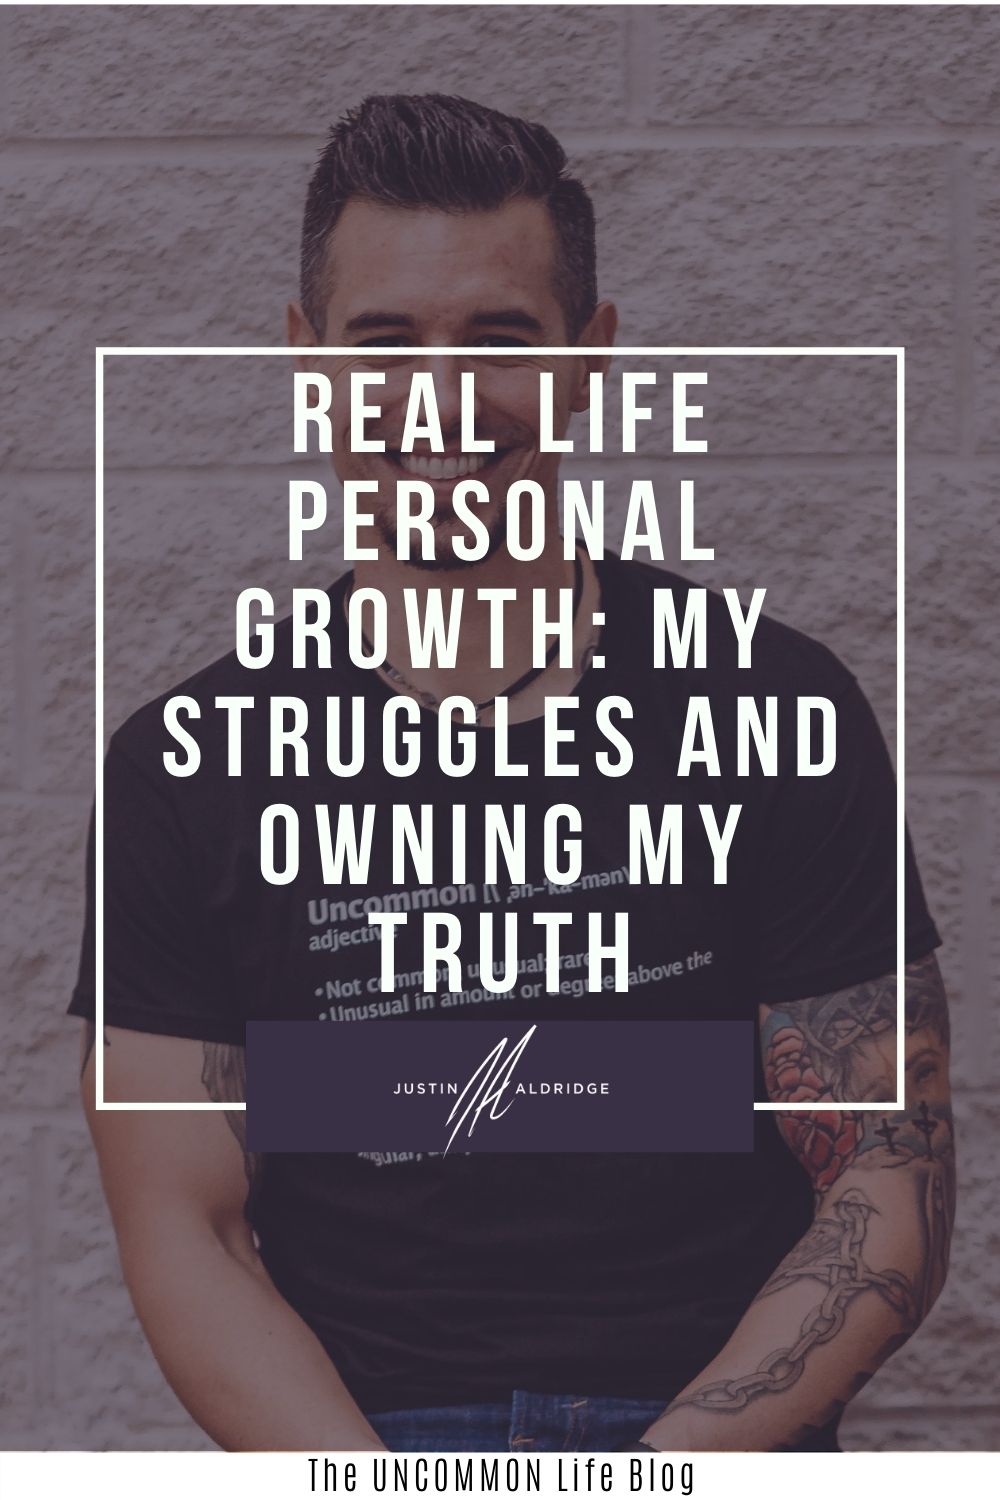 Picture of a man in a black shirt behind the text "Real life personal growth: my struggles and owning my truth"